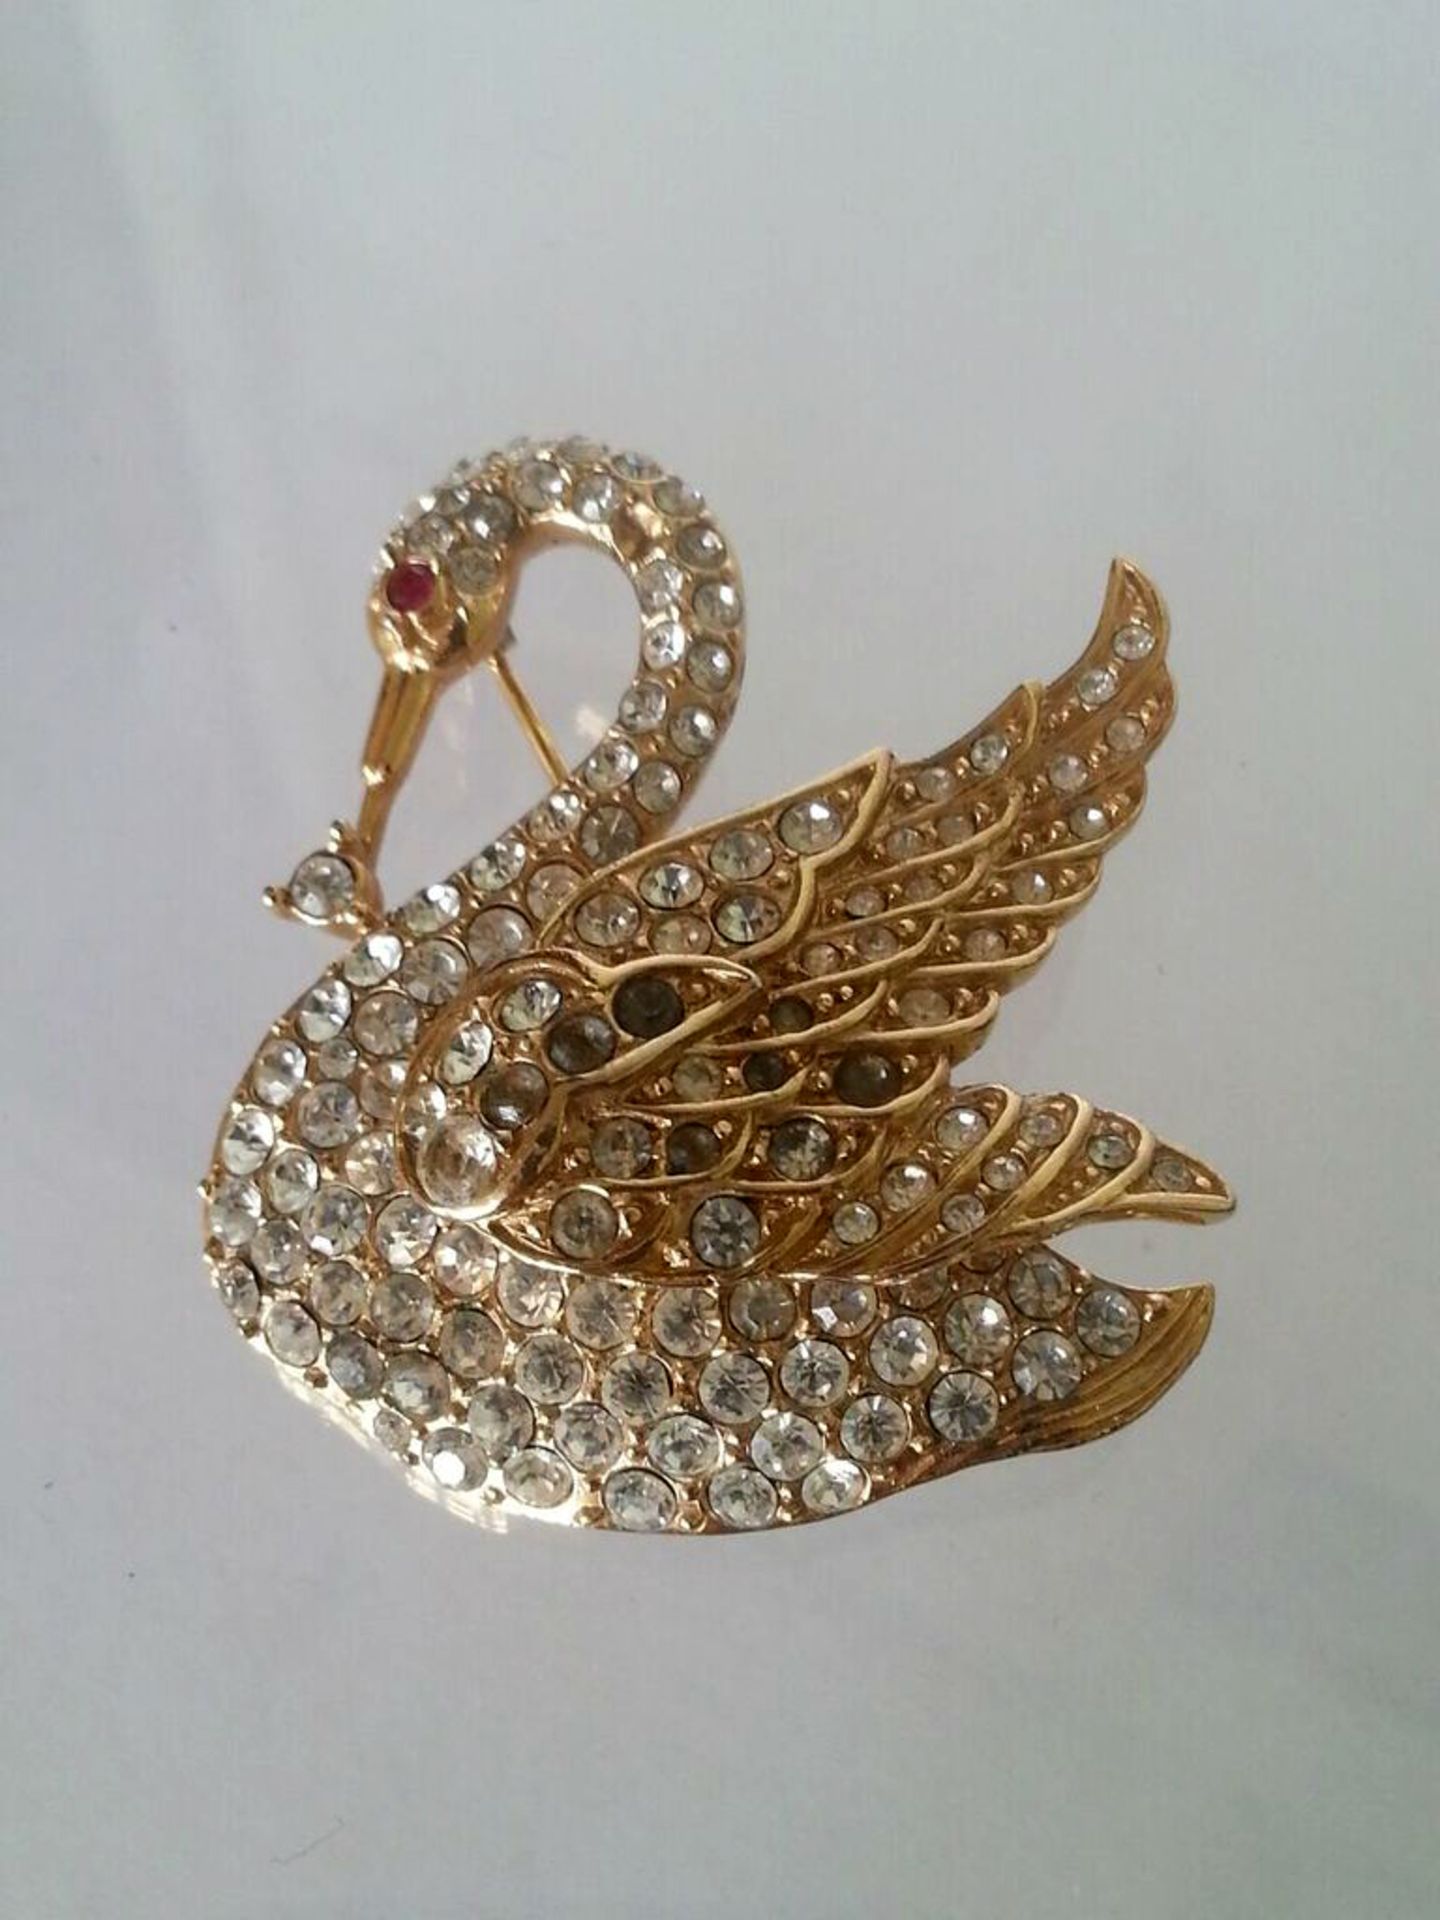 BEAUTIFUL PAVE SET DESIGNER SWAN BROOCH BY ATTWOOD & SAWYER. Low cost delivery available on all